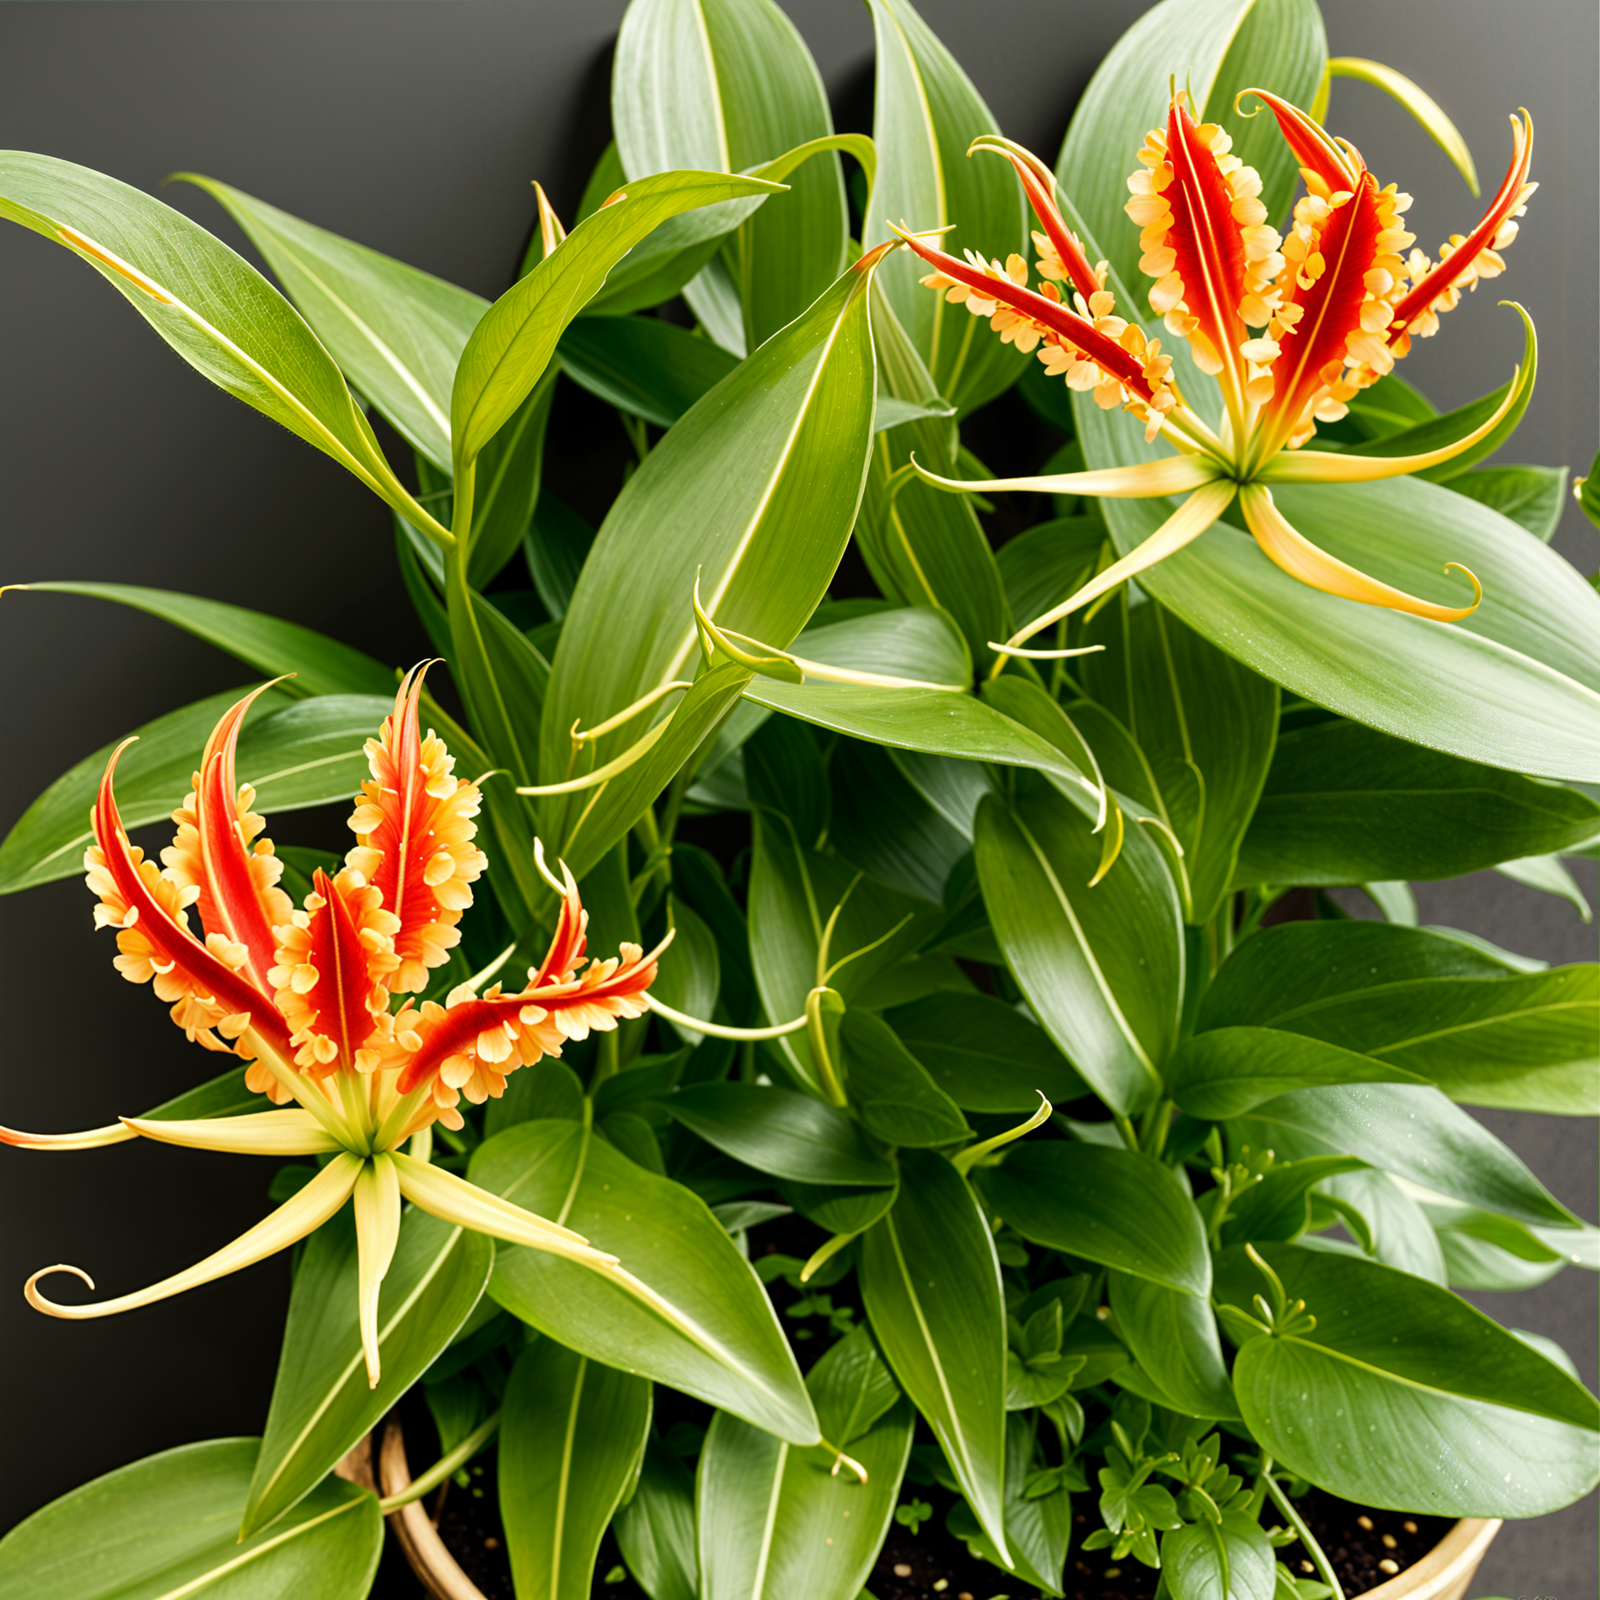 Gloriosa superba plant with flower in a planter, indoor décor, under clear lighting.